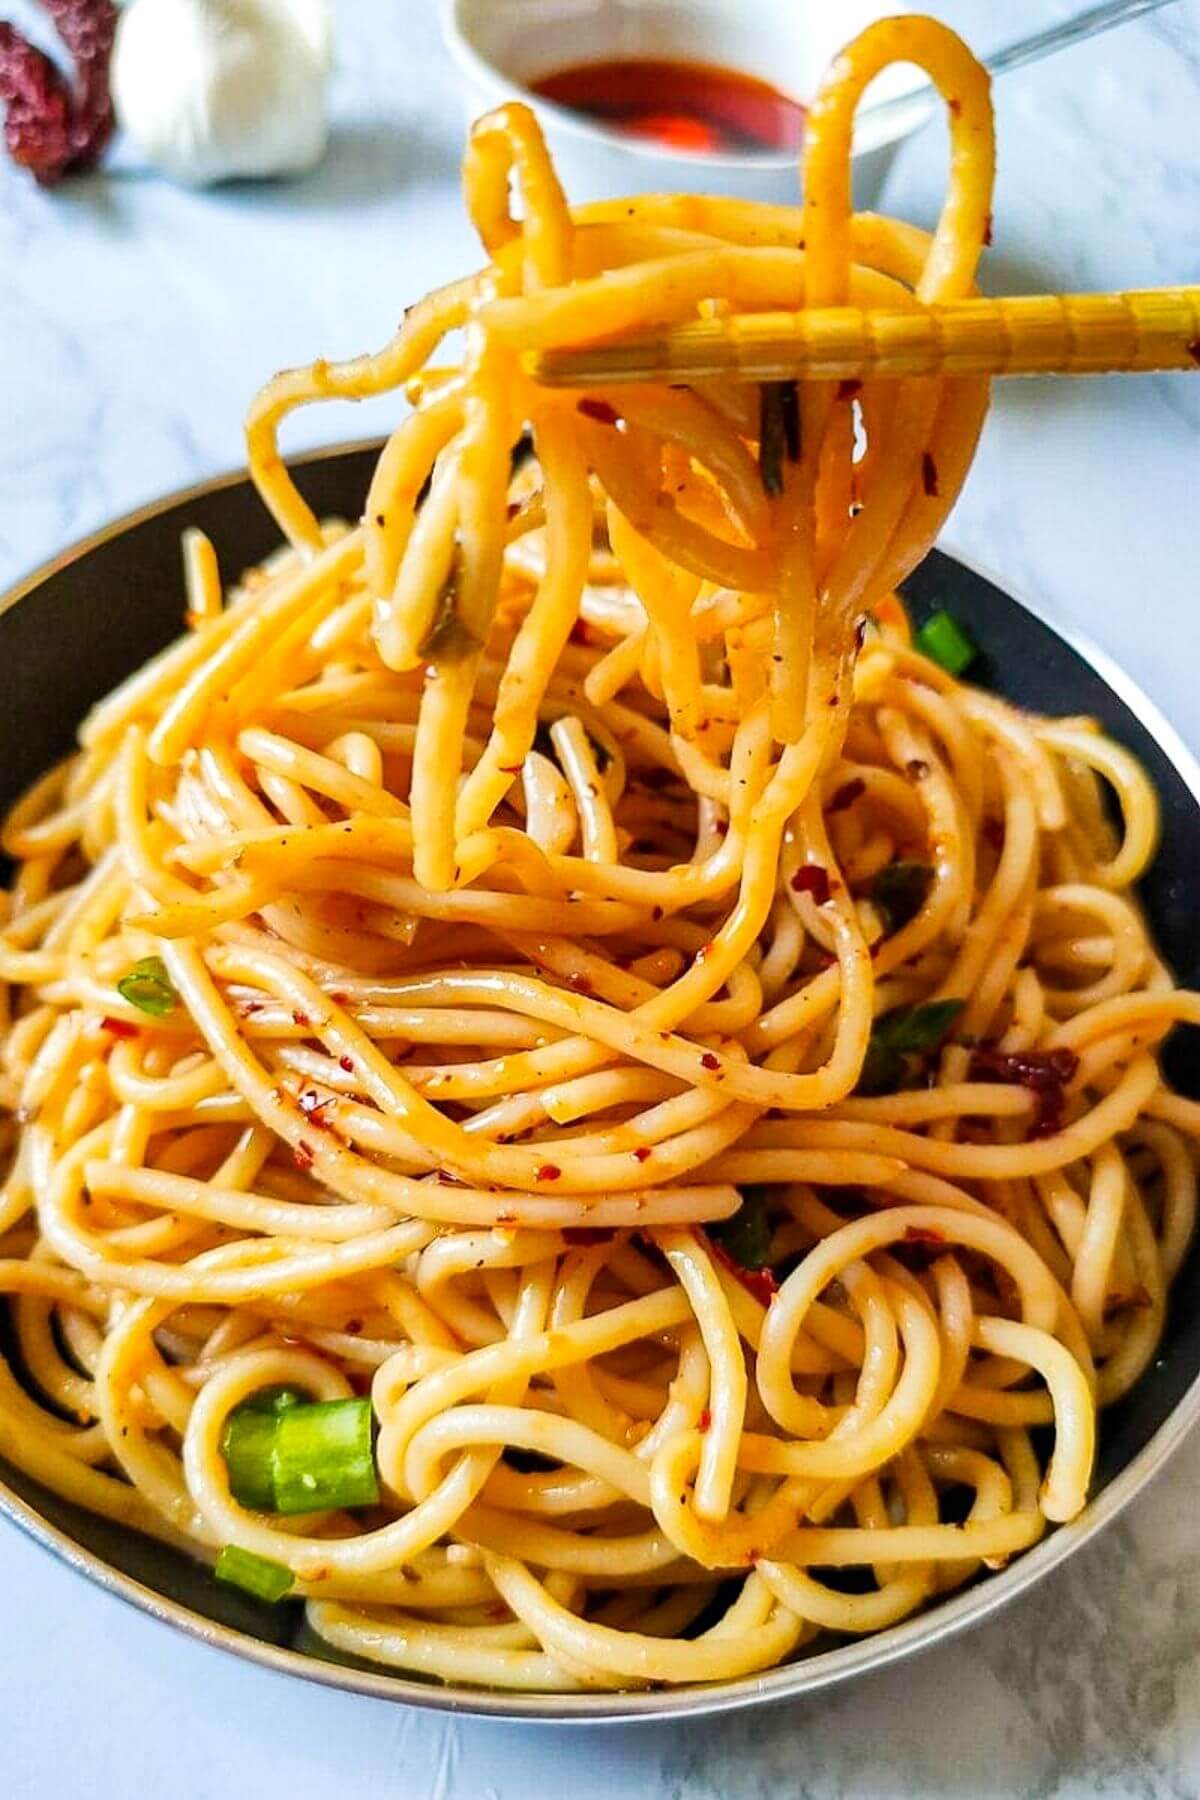 chili garlic noodles picked up with chopsticks